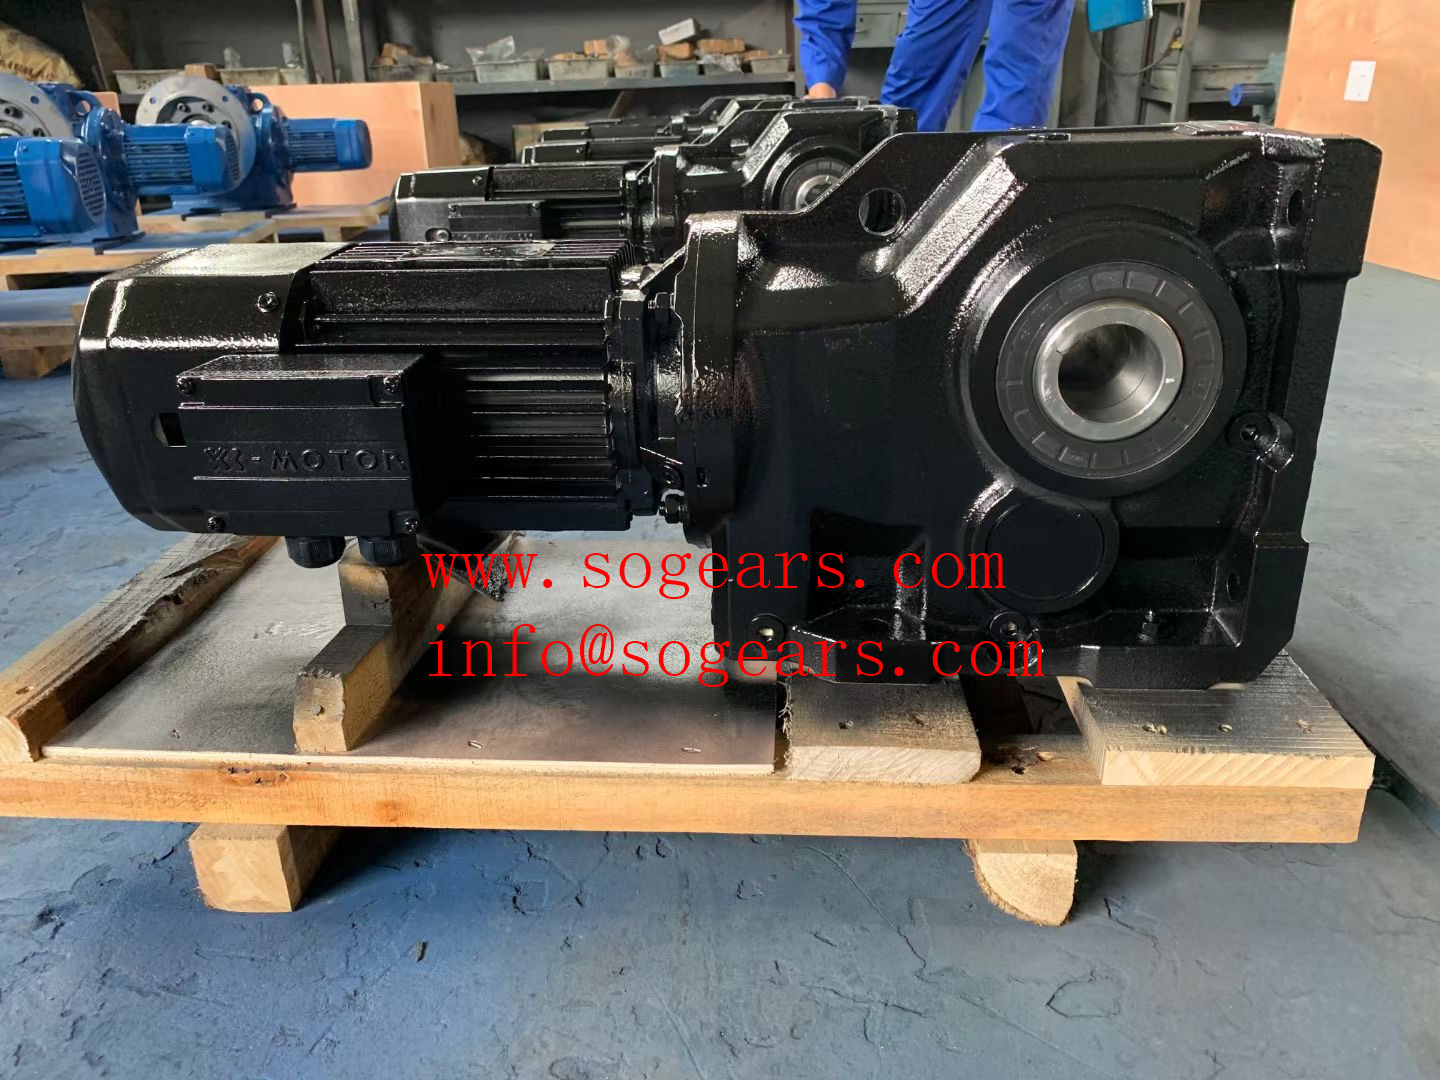 Electric motor with gearbox in china for industrial machinery